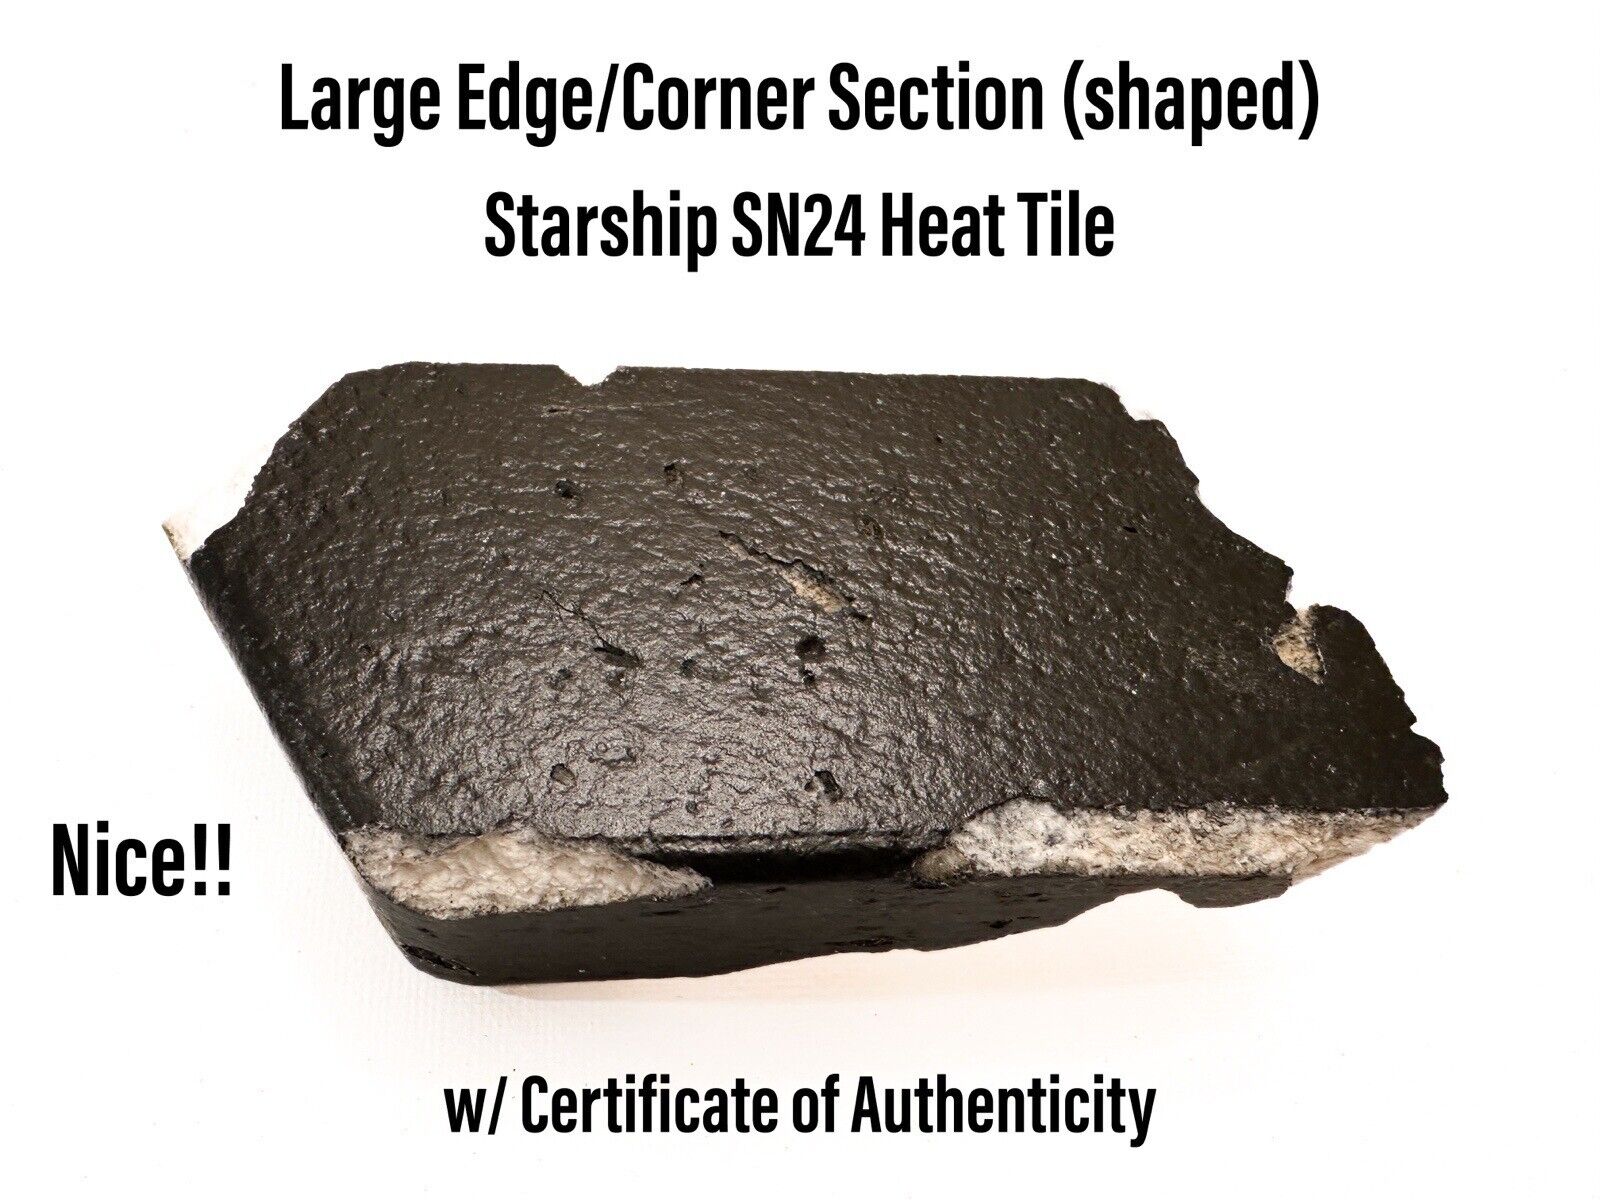 SpaceX Starship SN24 S24 Lg Heat Shield Thermal Tile Edge Section (shaped) A+